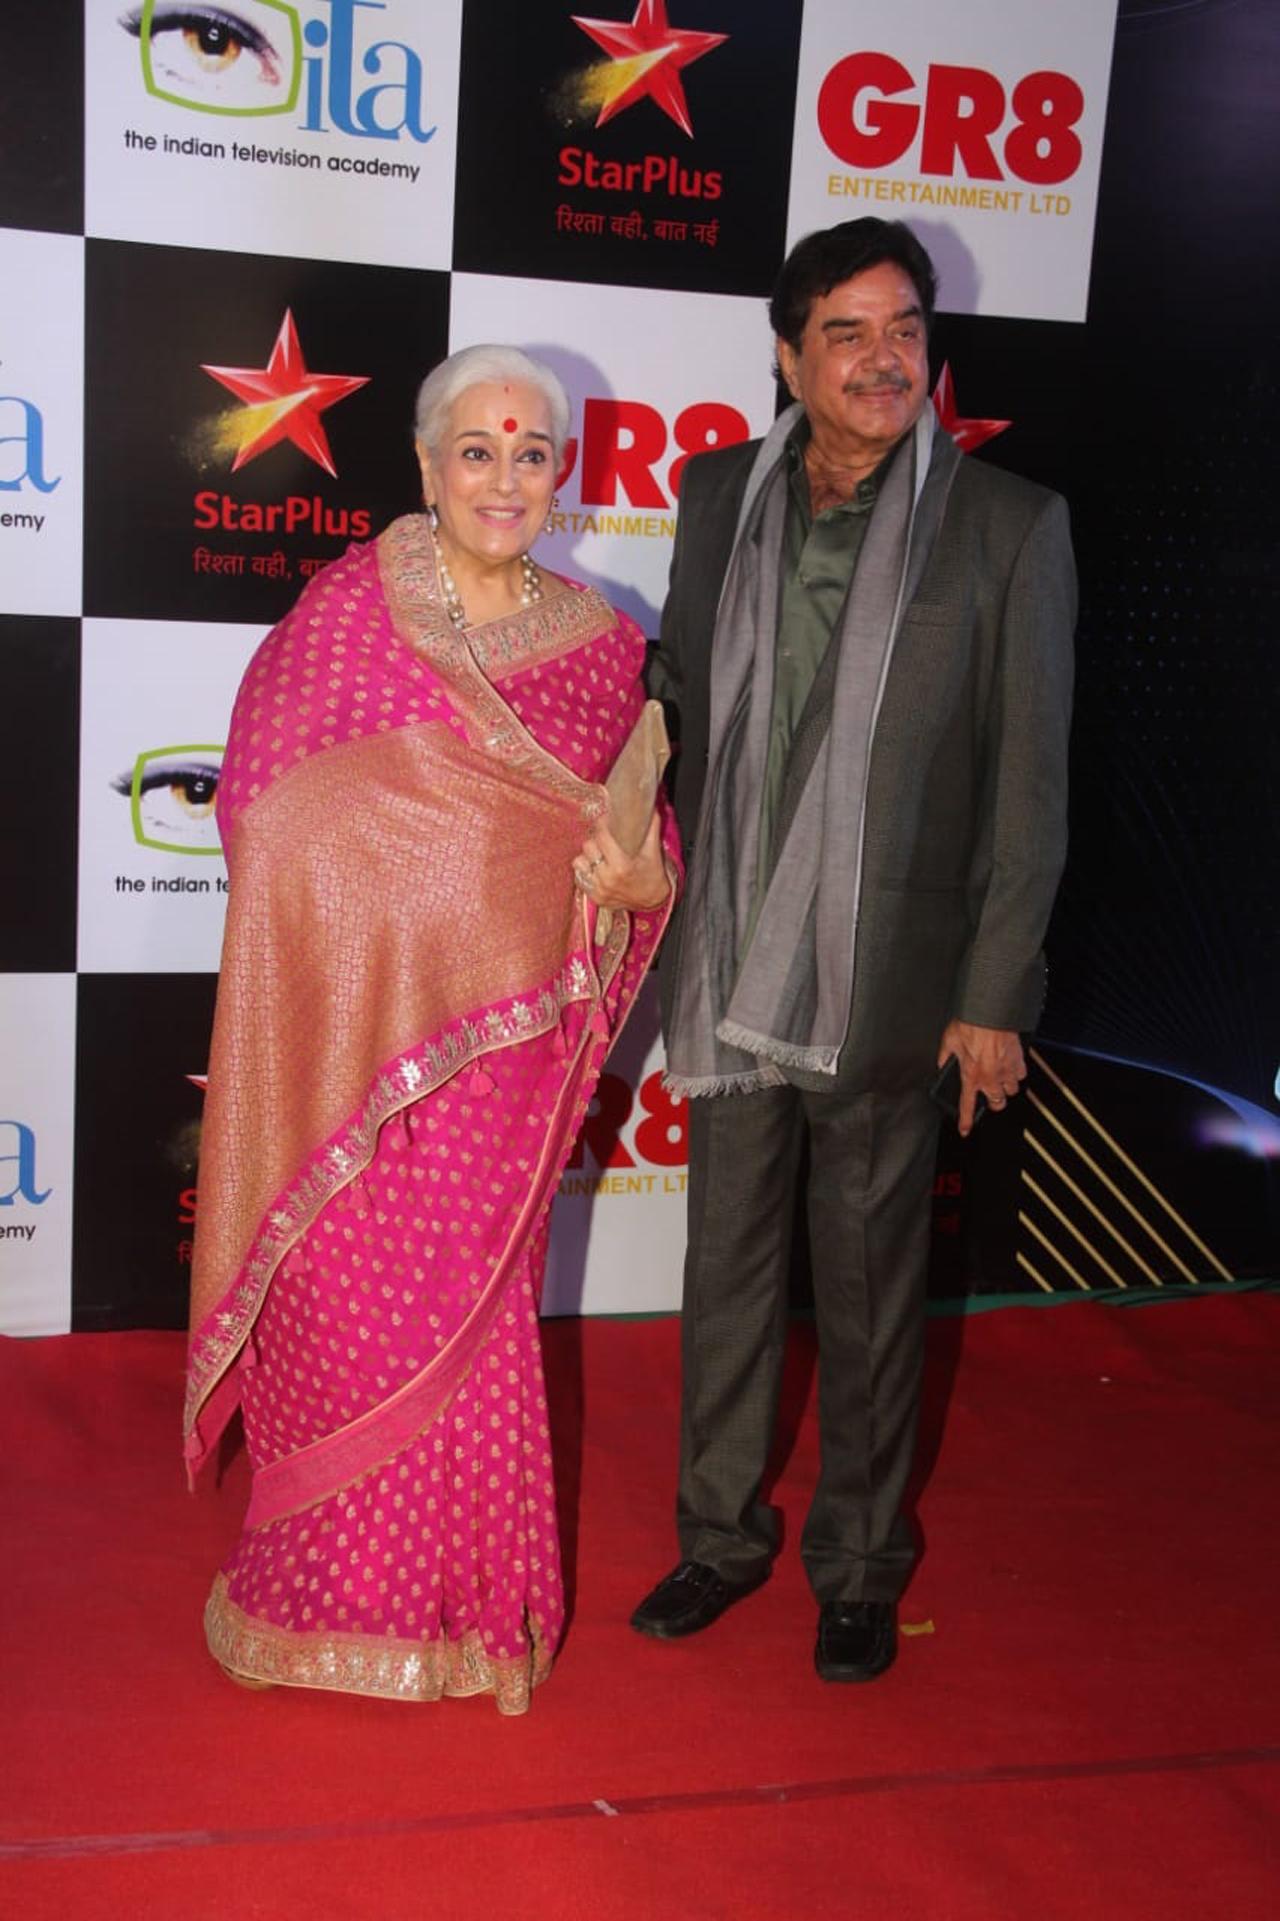 Poonam Sinha and Shatrughan Sinha were also a part of the award function.